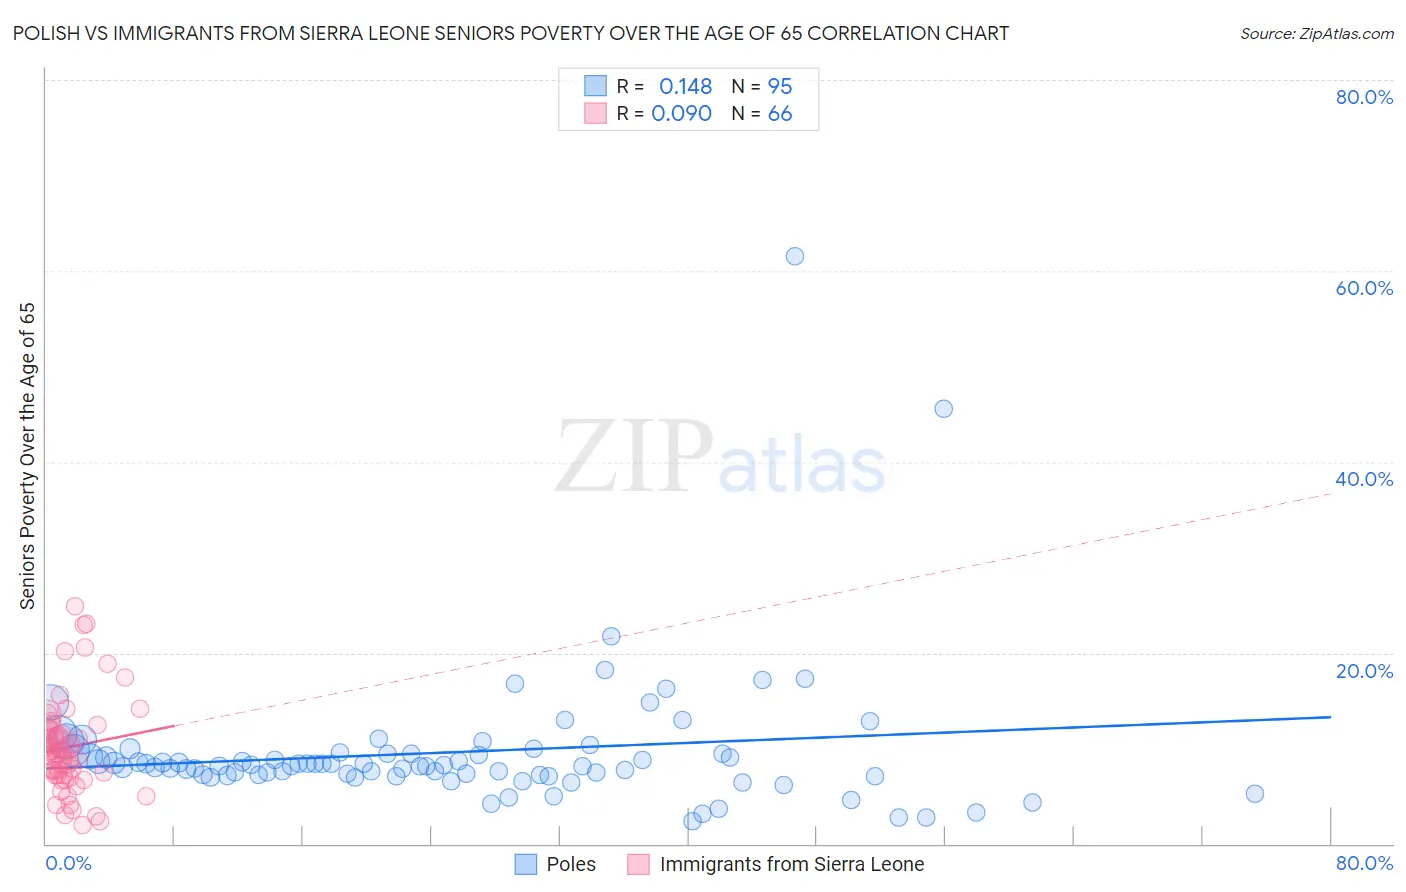 Polish vs Immigrants from Sierra Leone Seniors Poverty Over the Age of 65